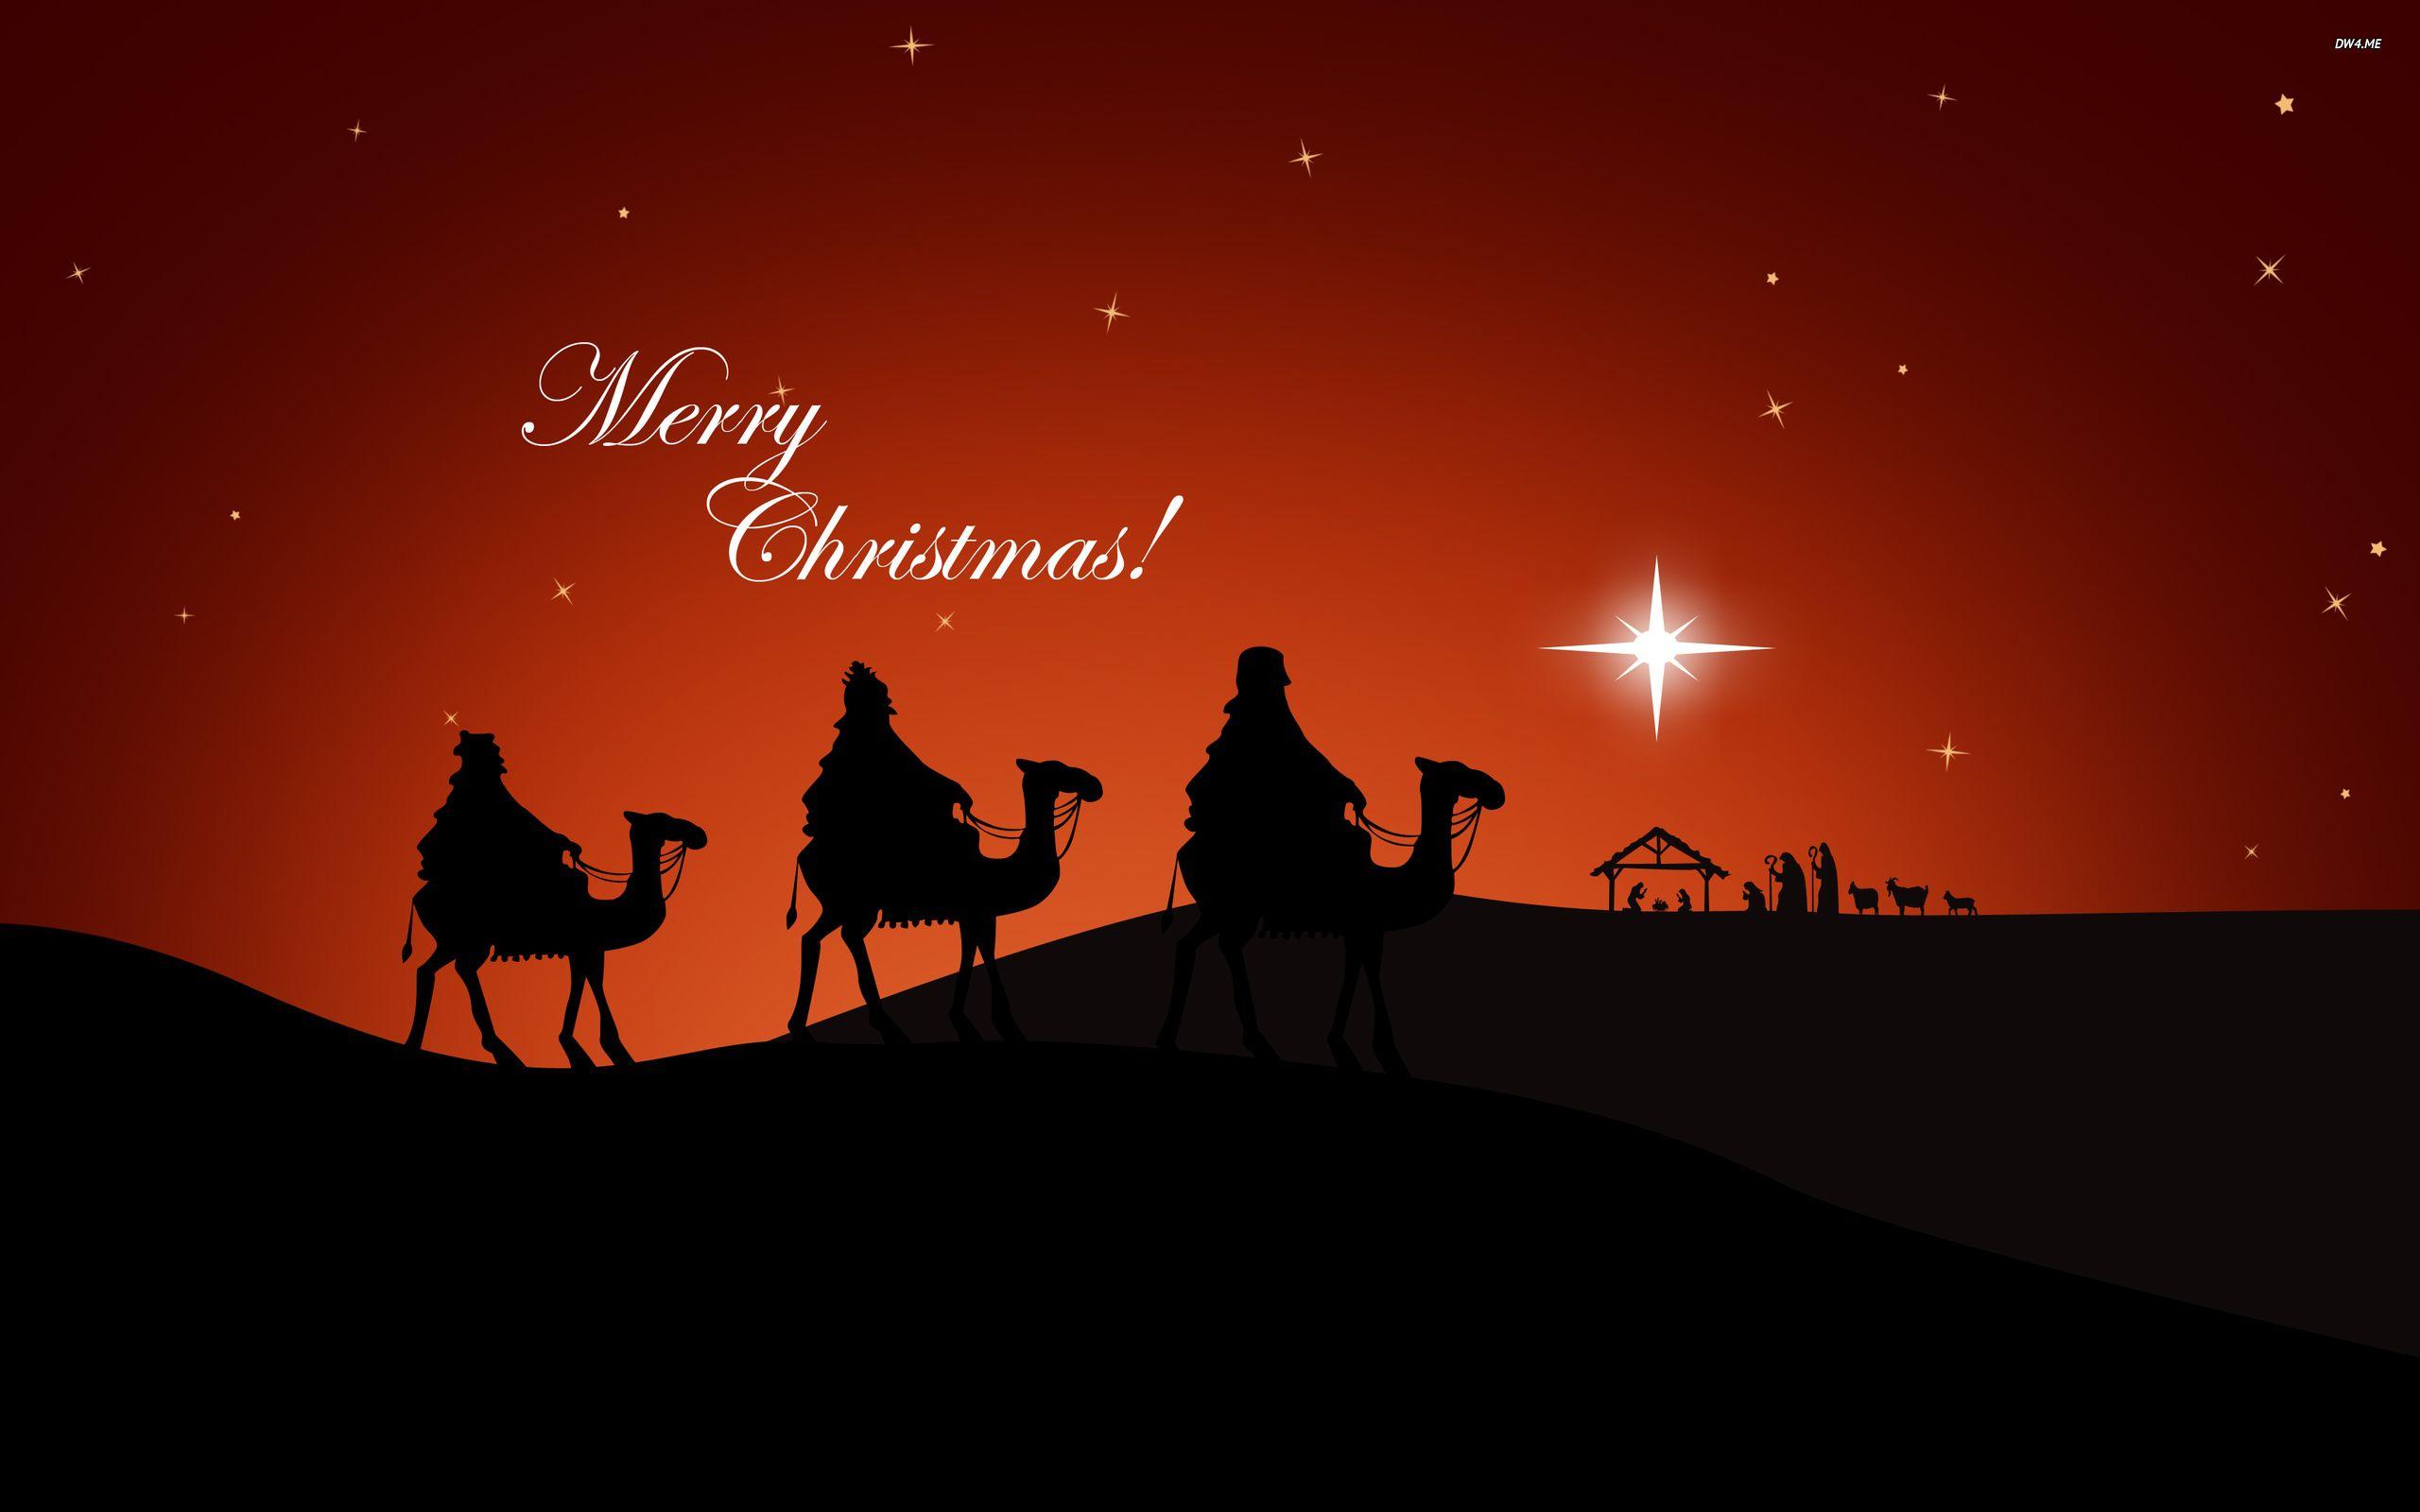 The Three Wise Men following the Star of Bethlehem wallpaper